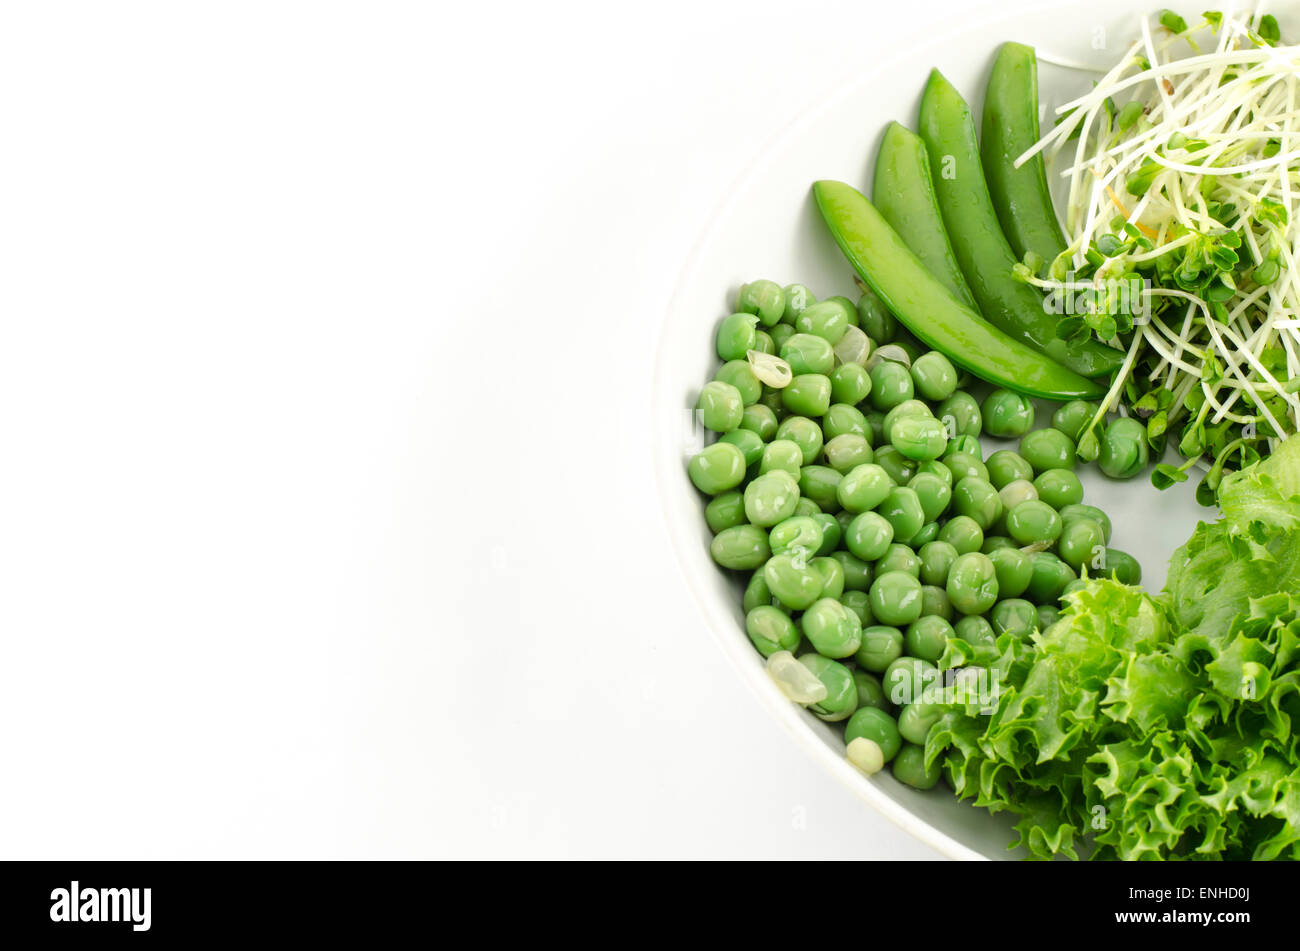 healthy food green vegetable isolated on white background Stock Photo